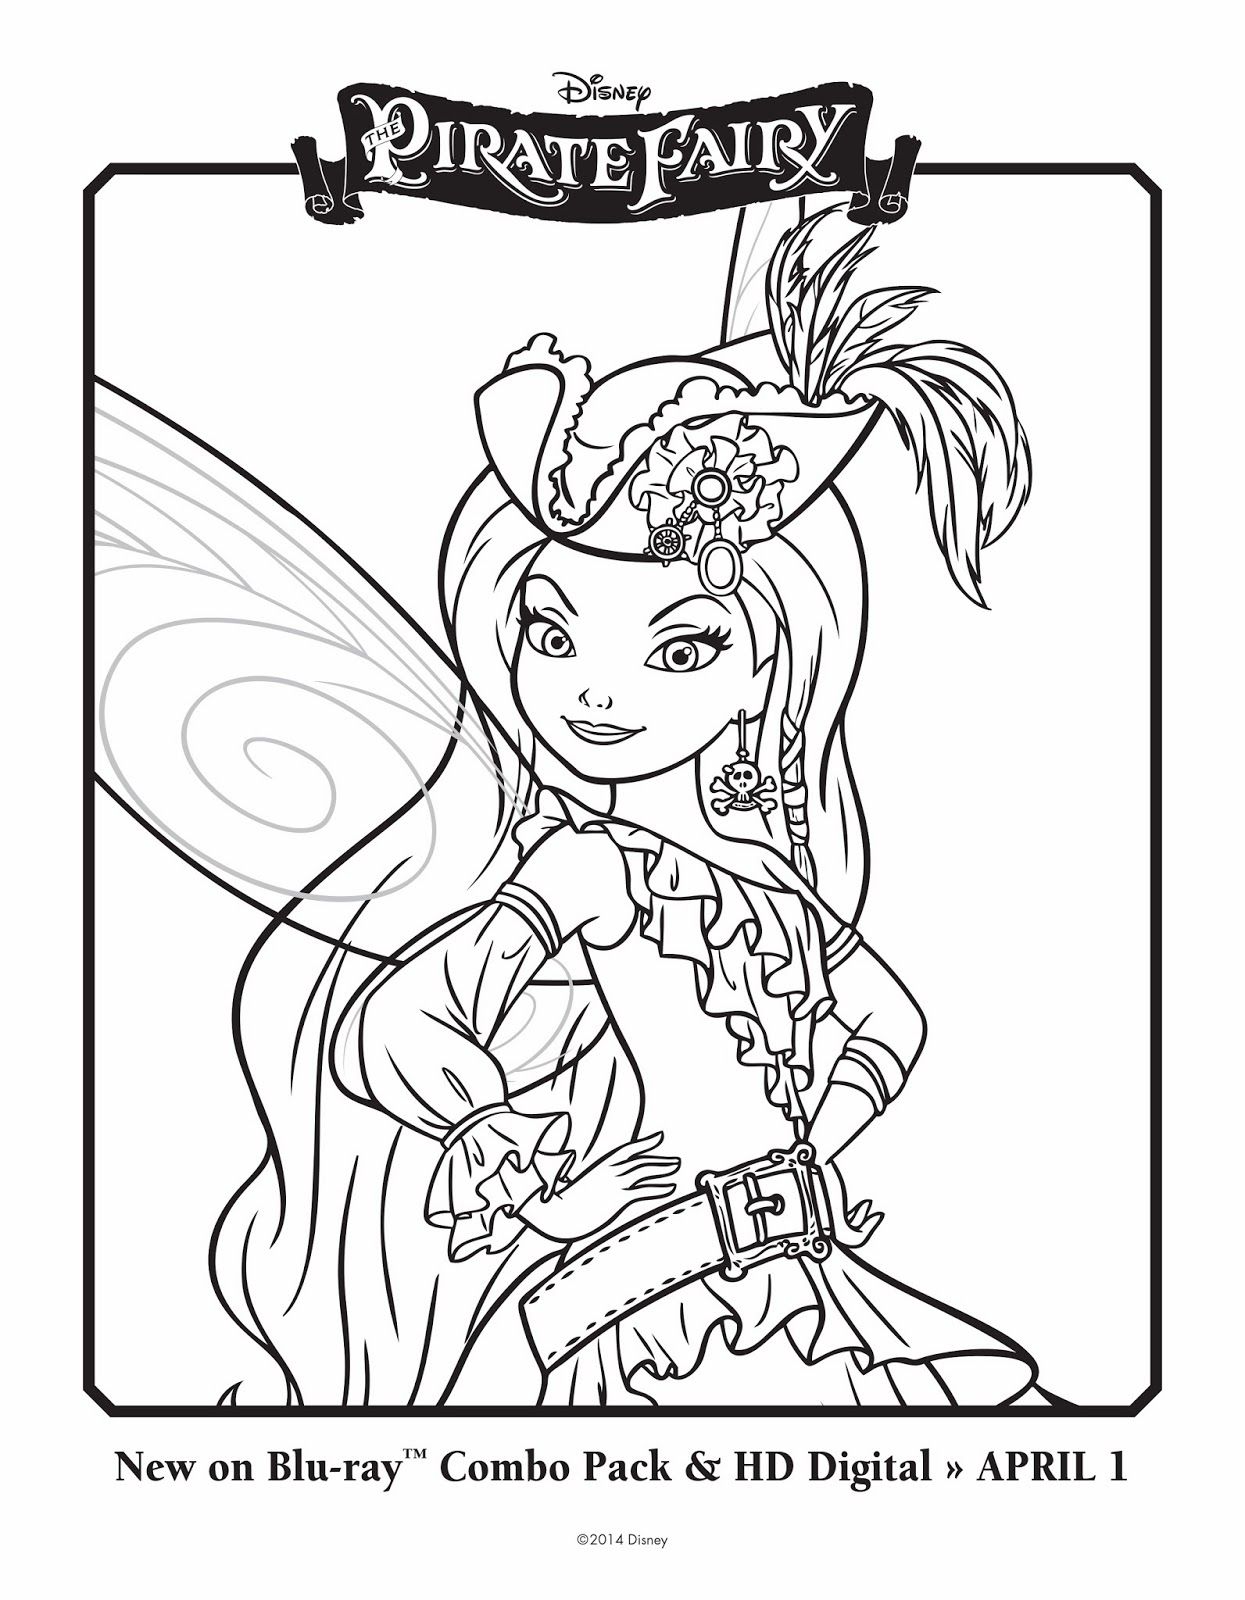 Tinkerbell Pirate Fairy Coloring Pages | Cooloring.com